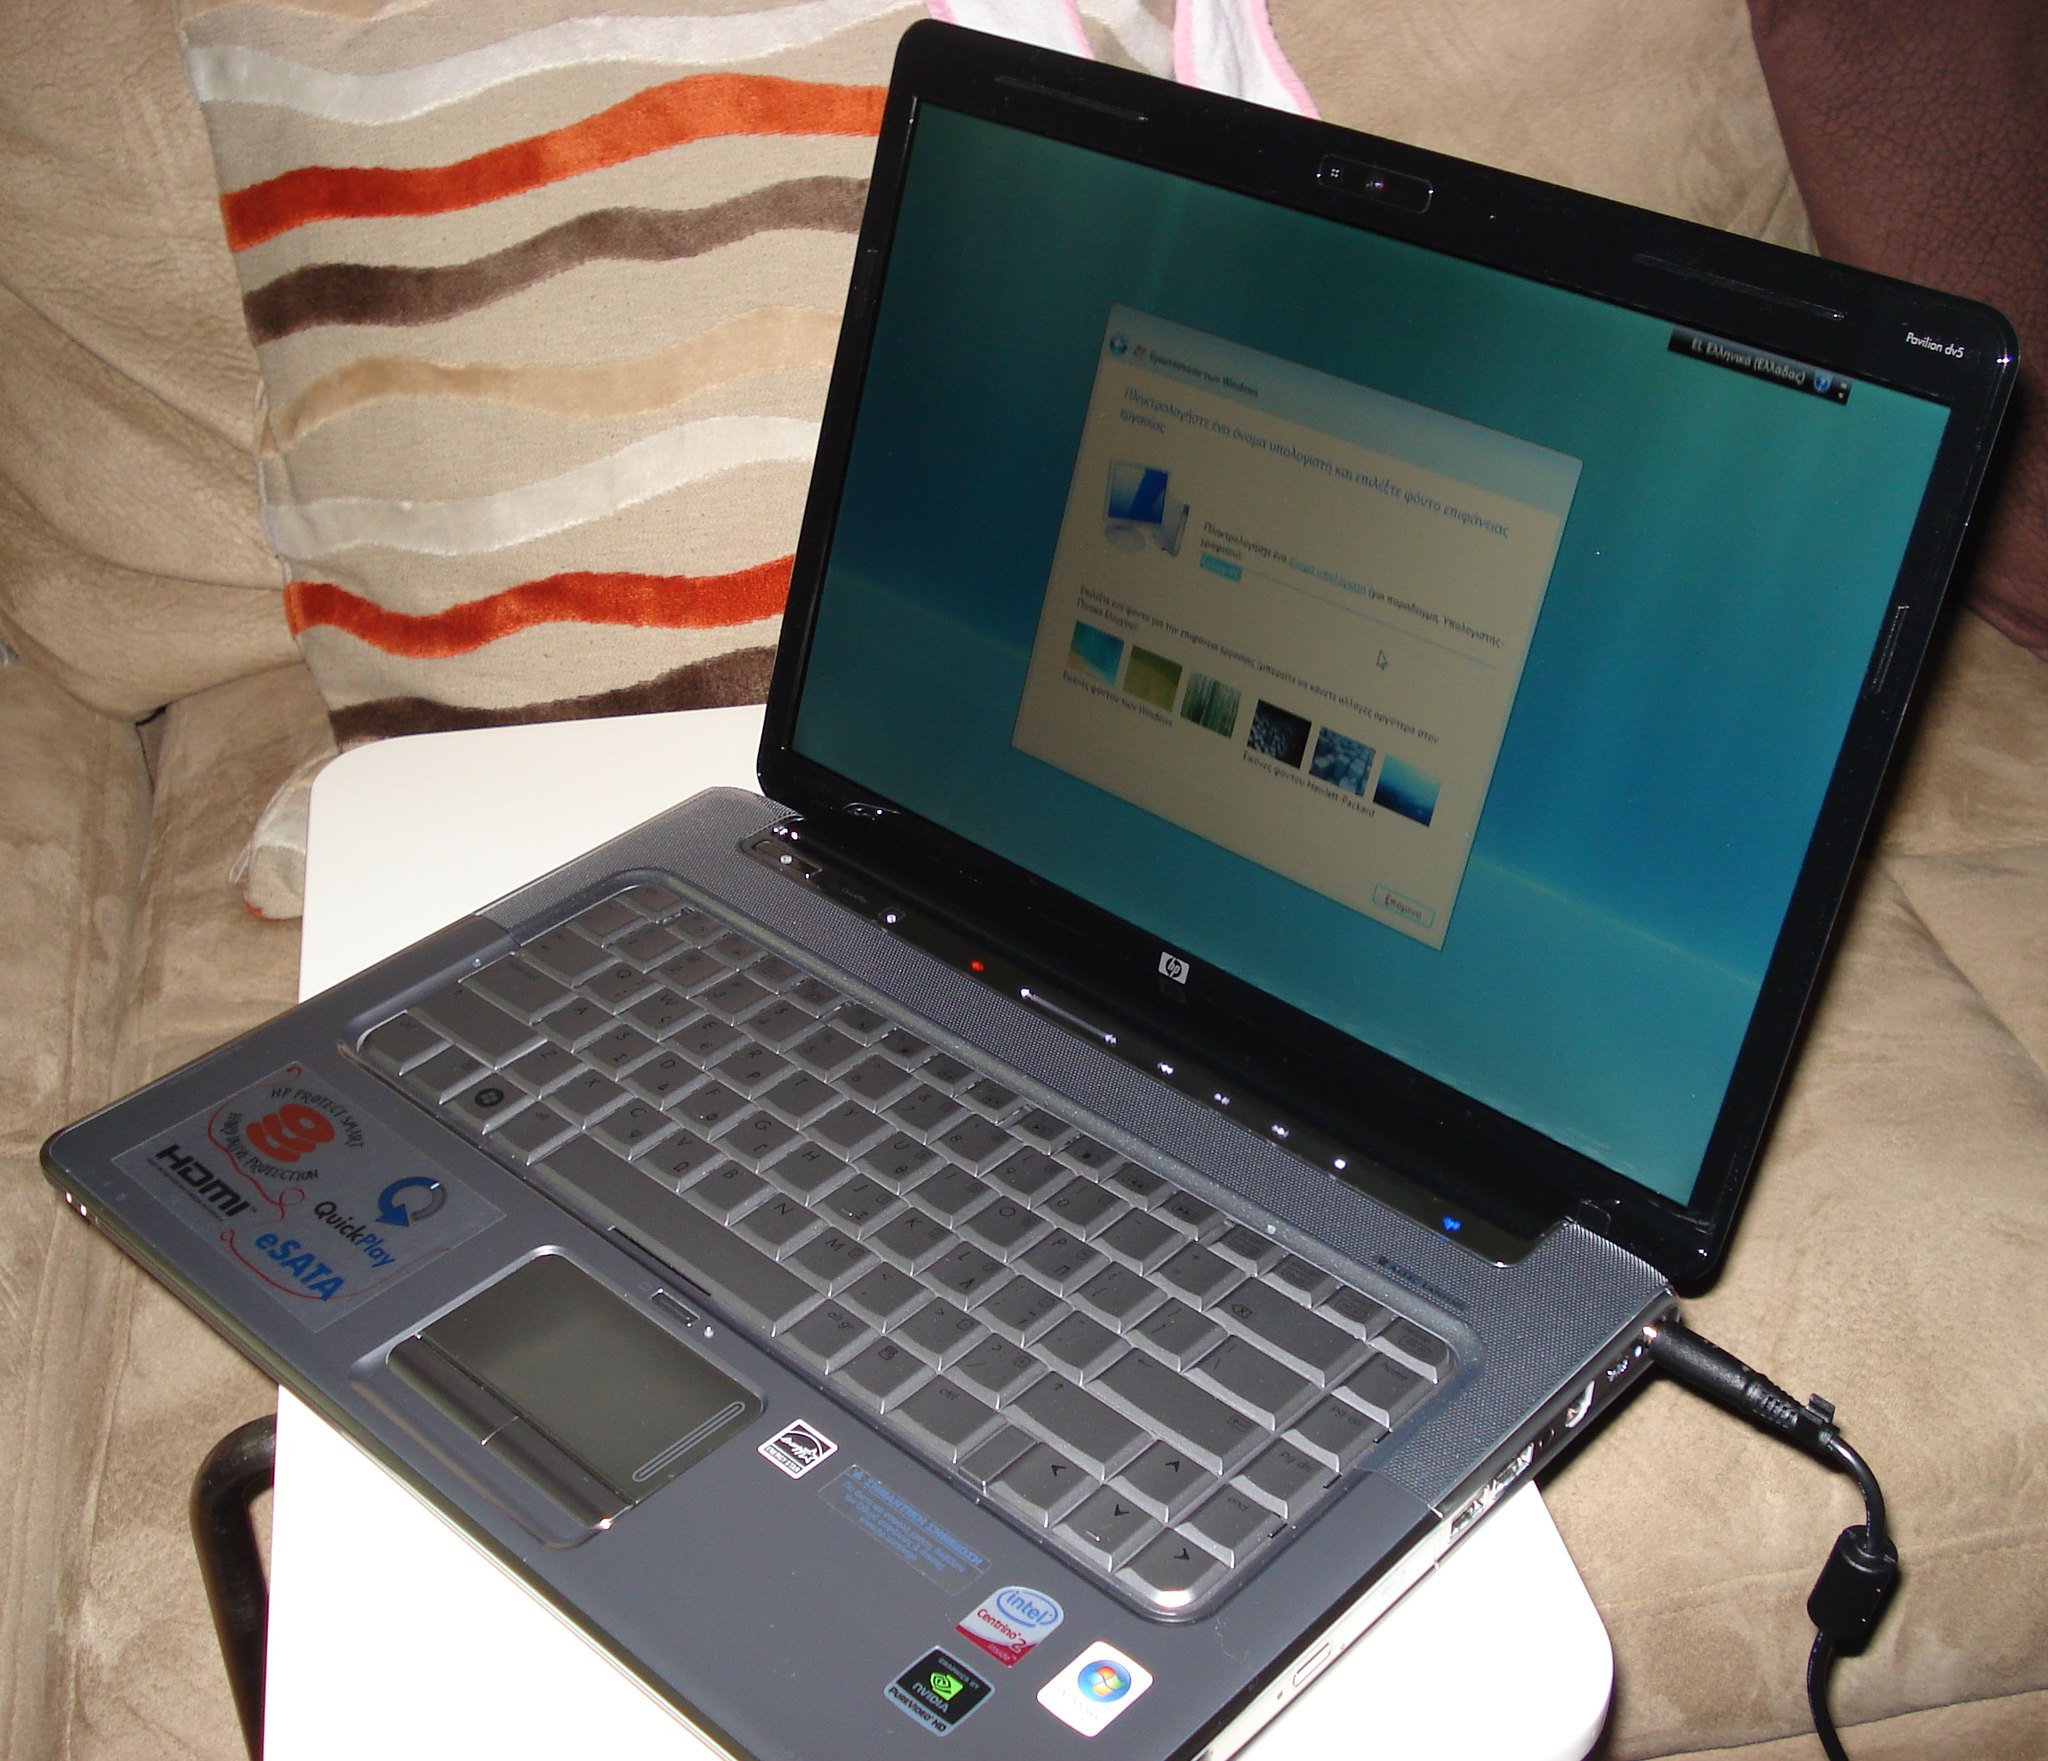 A laptop connected to a charger | Source: Flickr